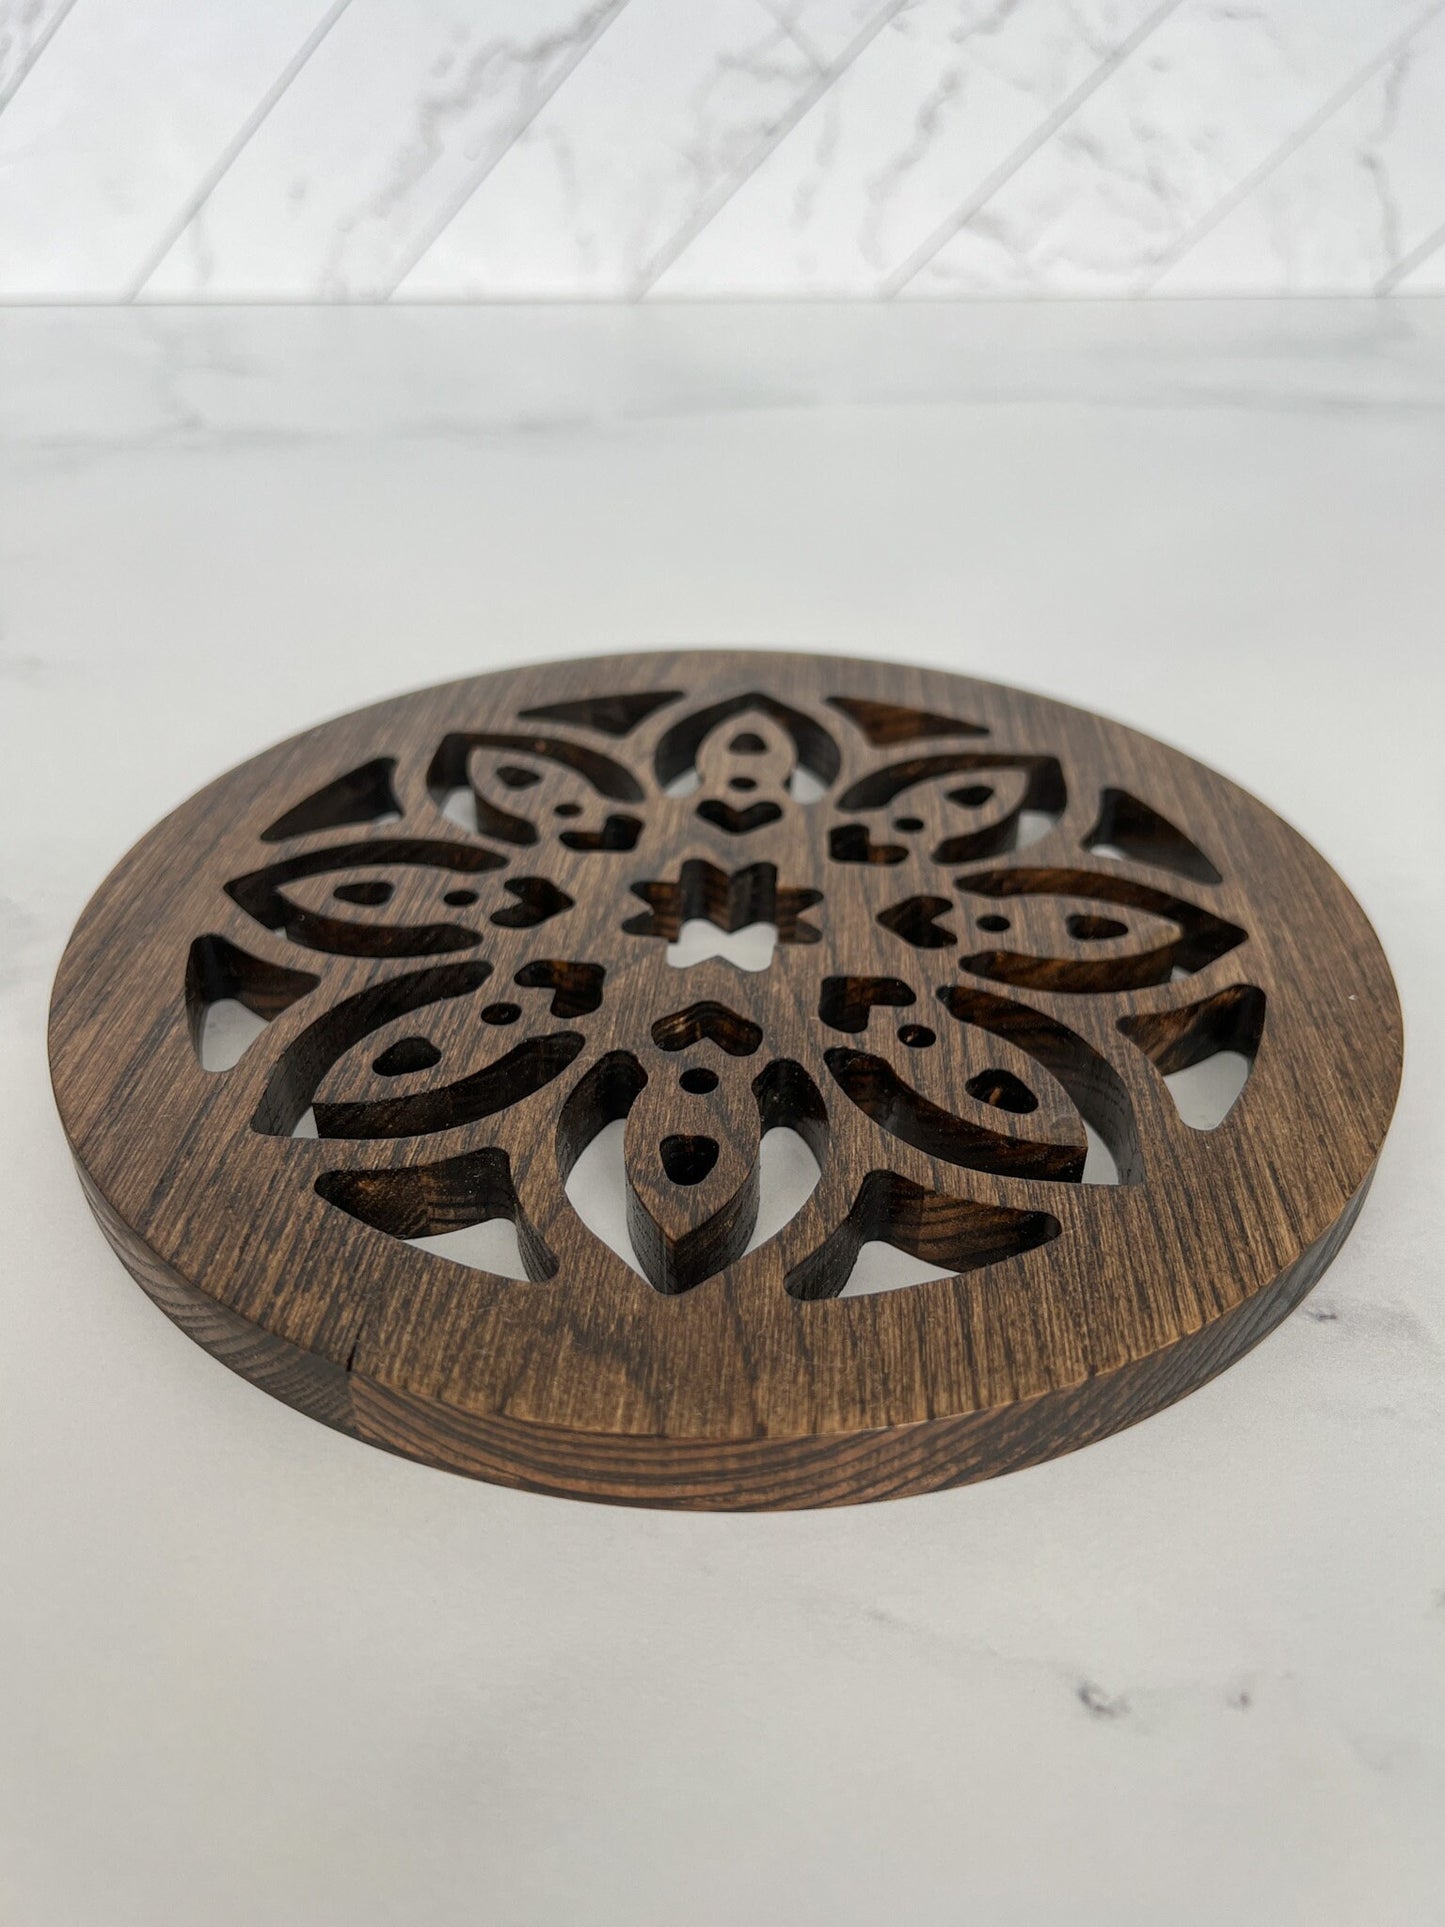 Flower Cutout Wooden Trivet, Serving Tray, Wood Trivet for Dining Table, Dining Accessories, Wood Gifts, Hot Tray, Pot Holder